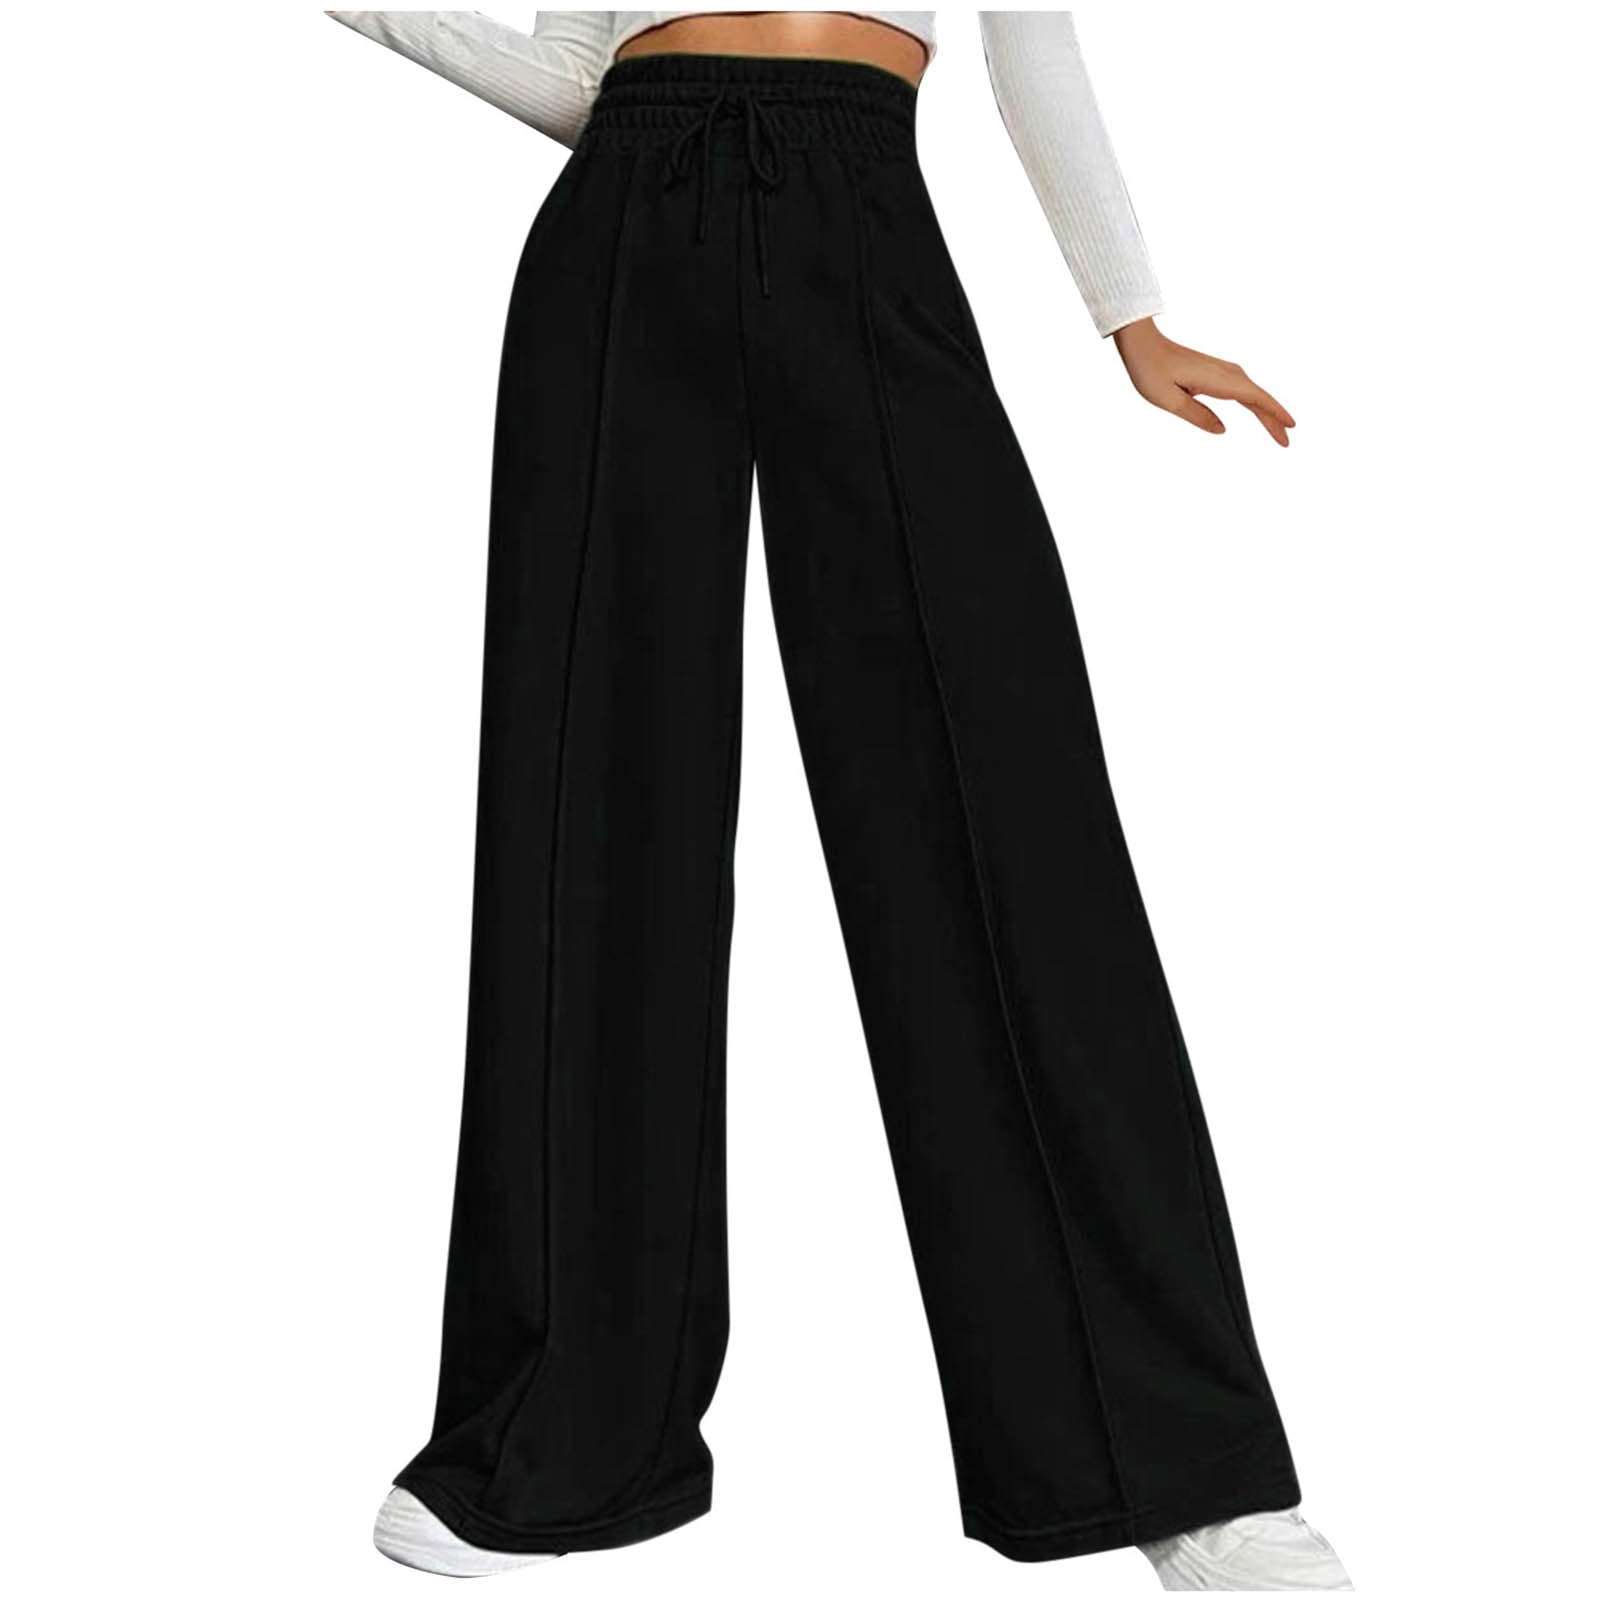 safuny Women's Wide Leg Loose Pants Relaxed Trousers Fashion